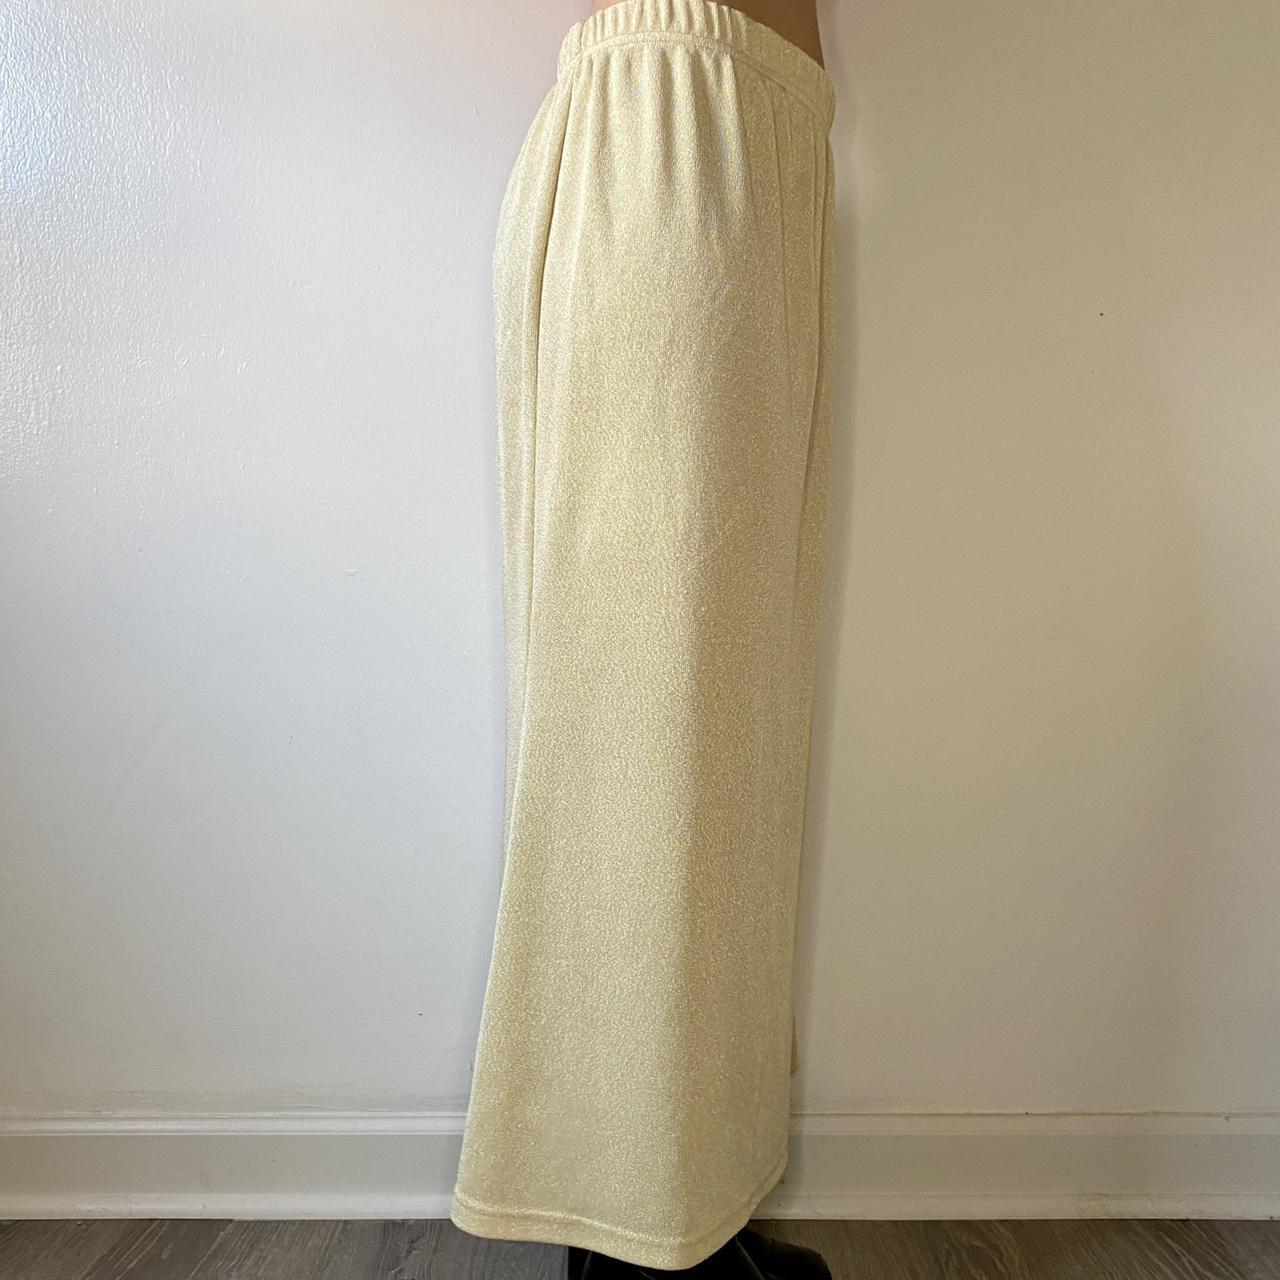 Product Image 3 - GOLD GLITTER SKIRT

This is so